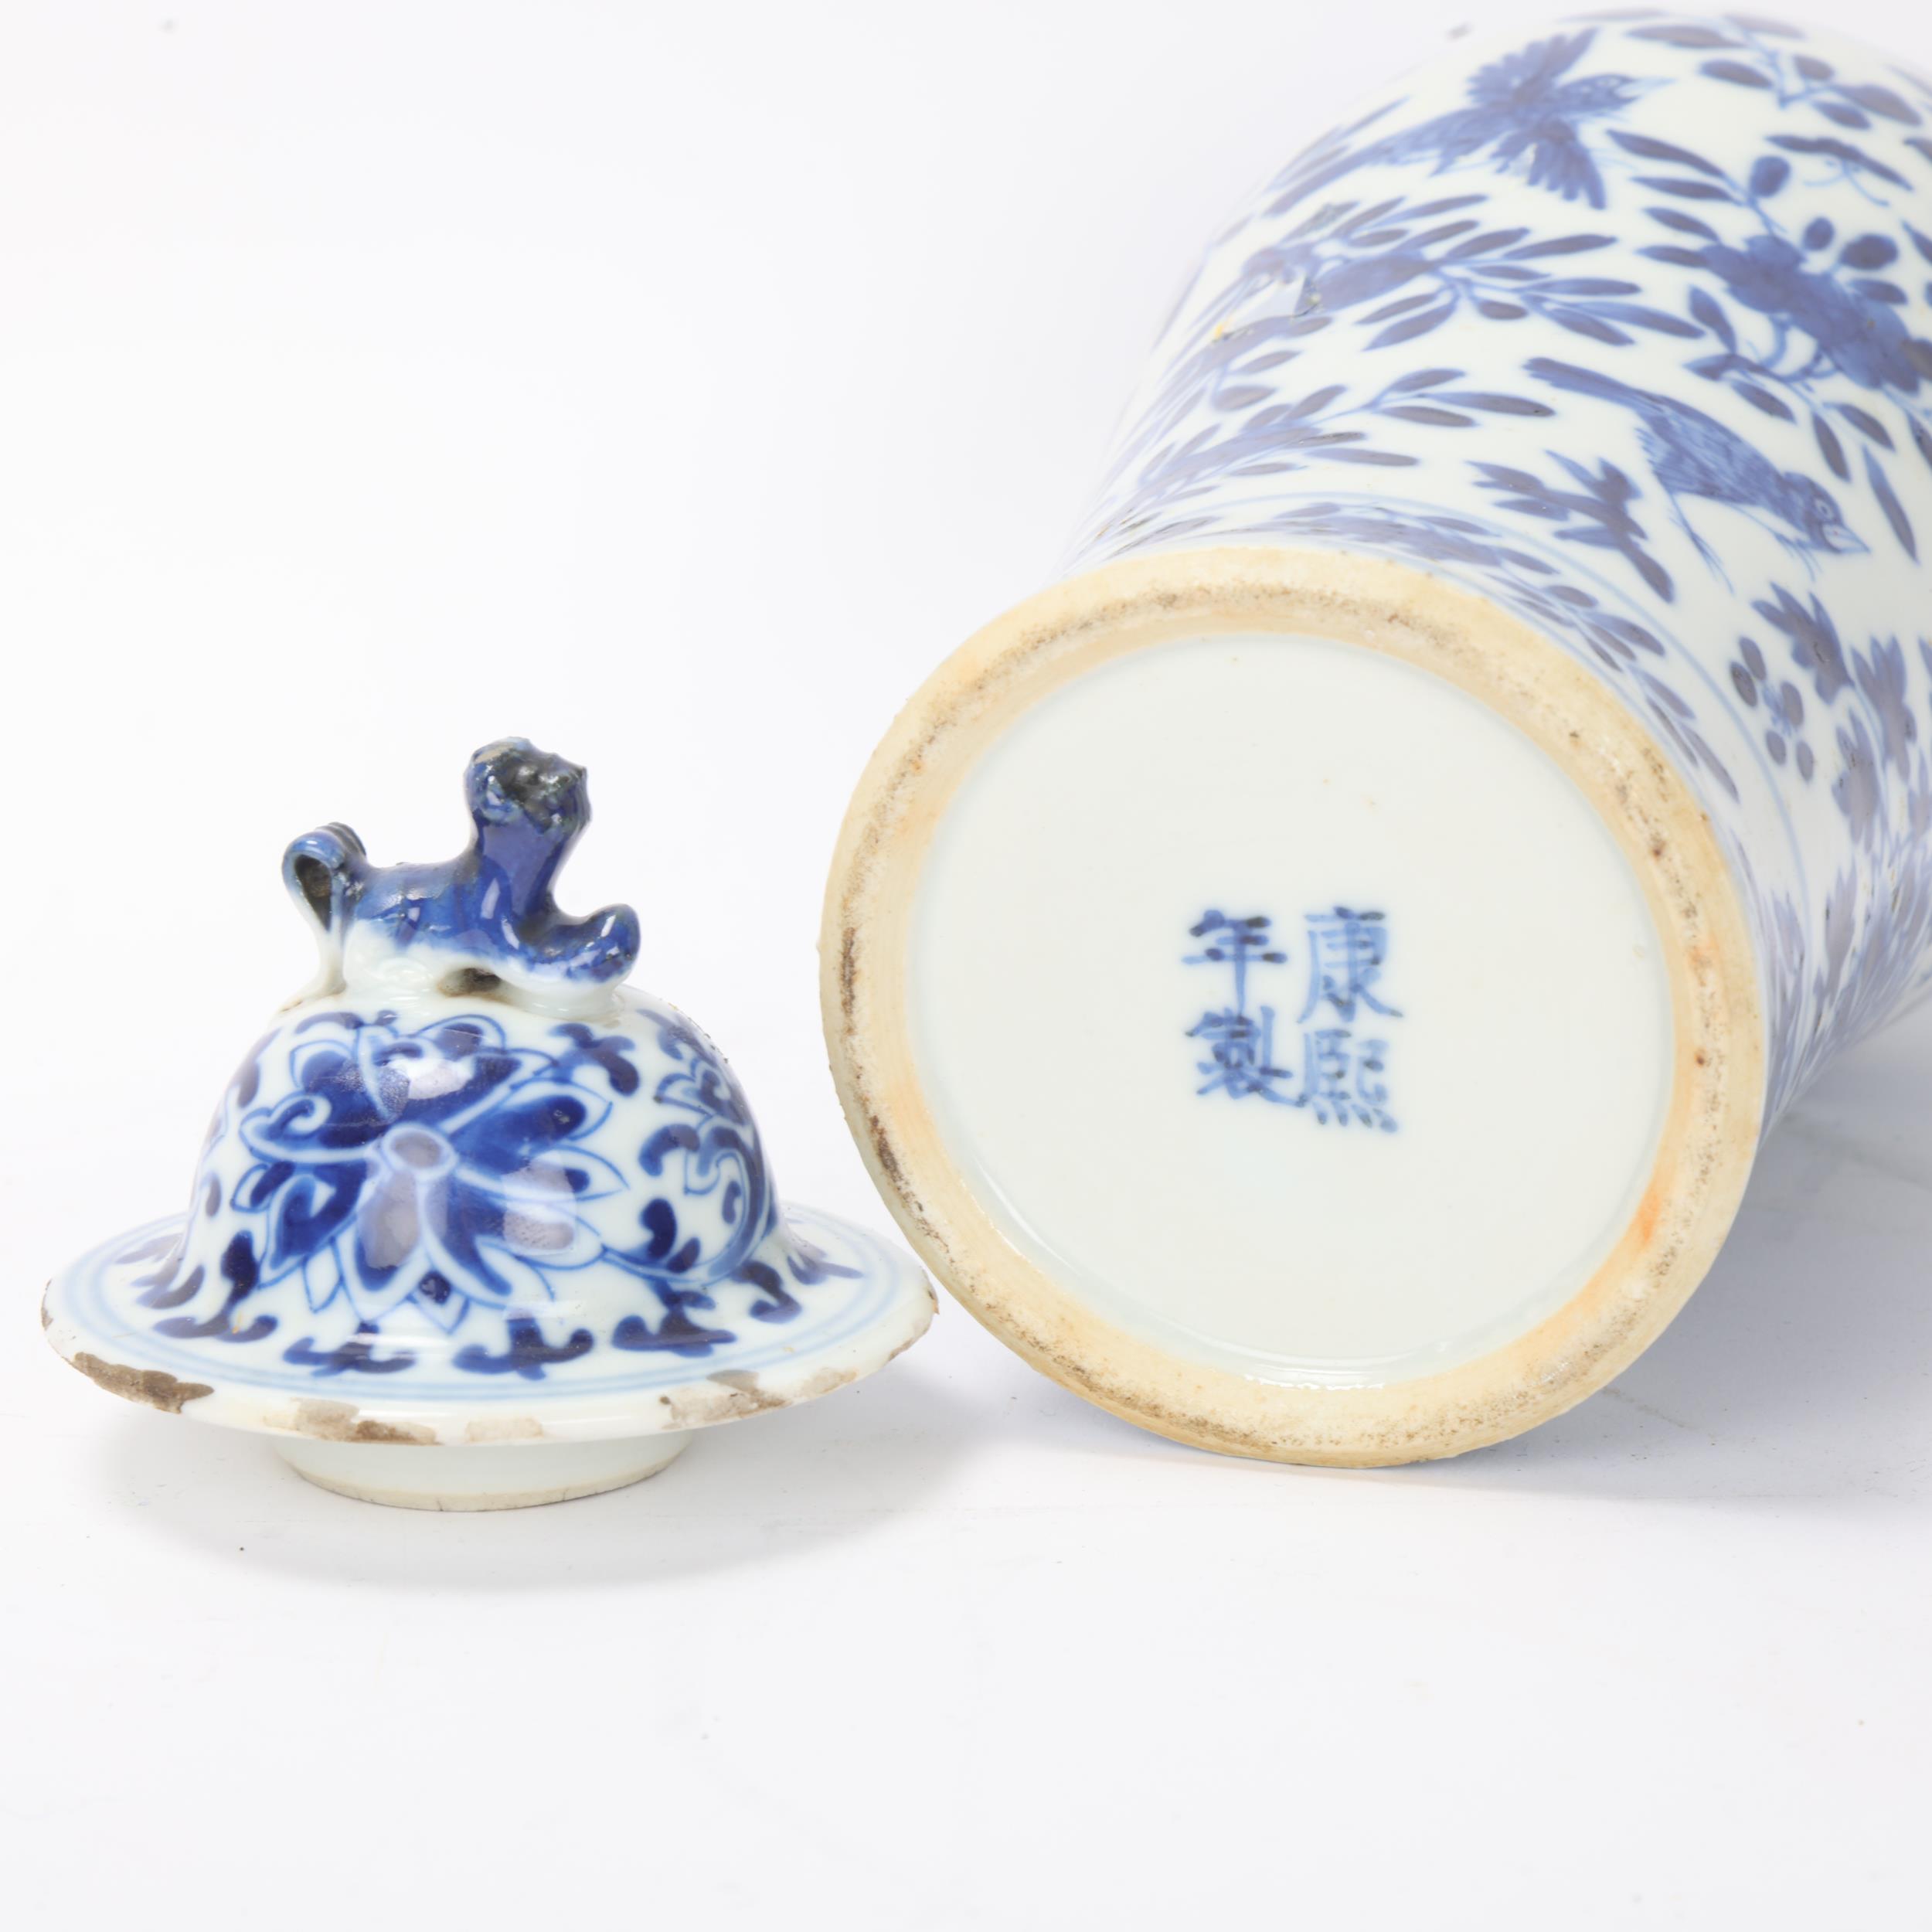 Chinese blue and white porcelain jar and cover, Kangxi mark, dog of fo knop, 4 character mark, - Image 2 of 3